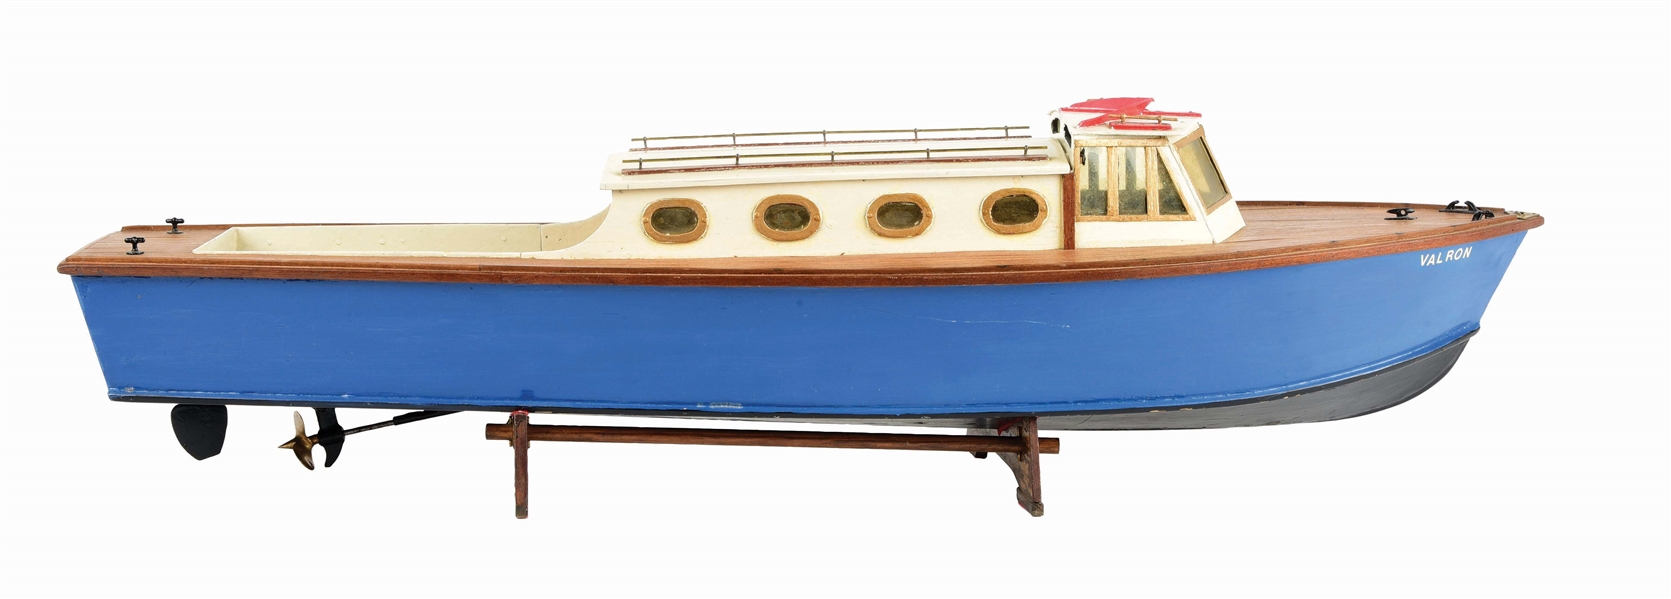 EARLY VALTRON WOODEN MODEL BOAT.